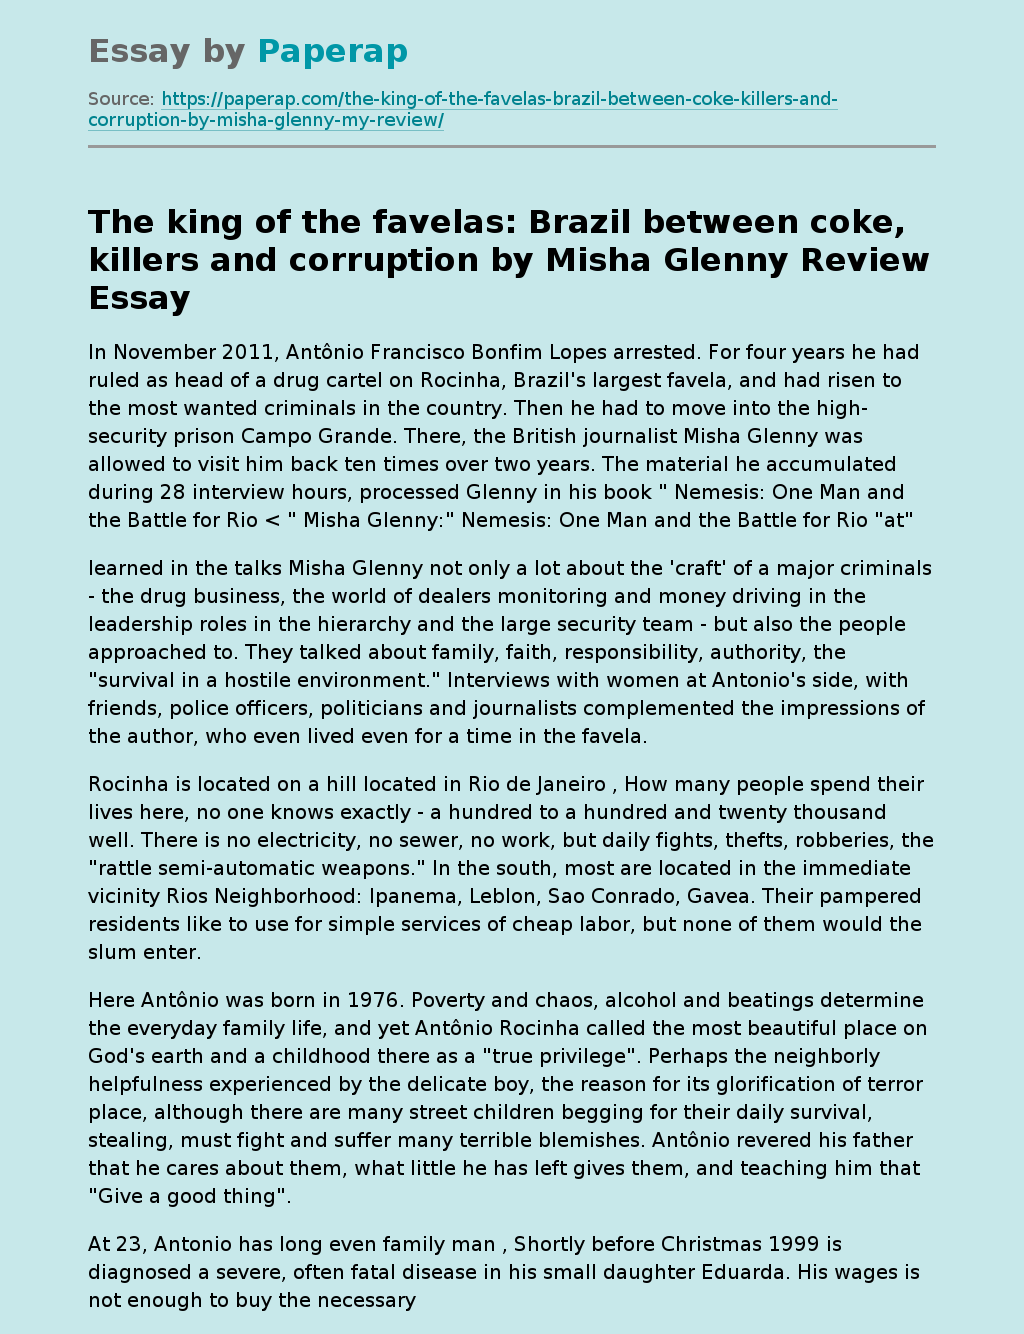 "The King Of The Favelas": Brazil Between Coke, Killers And Corruption